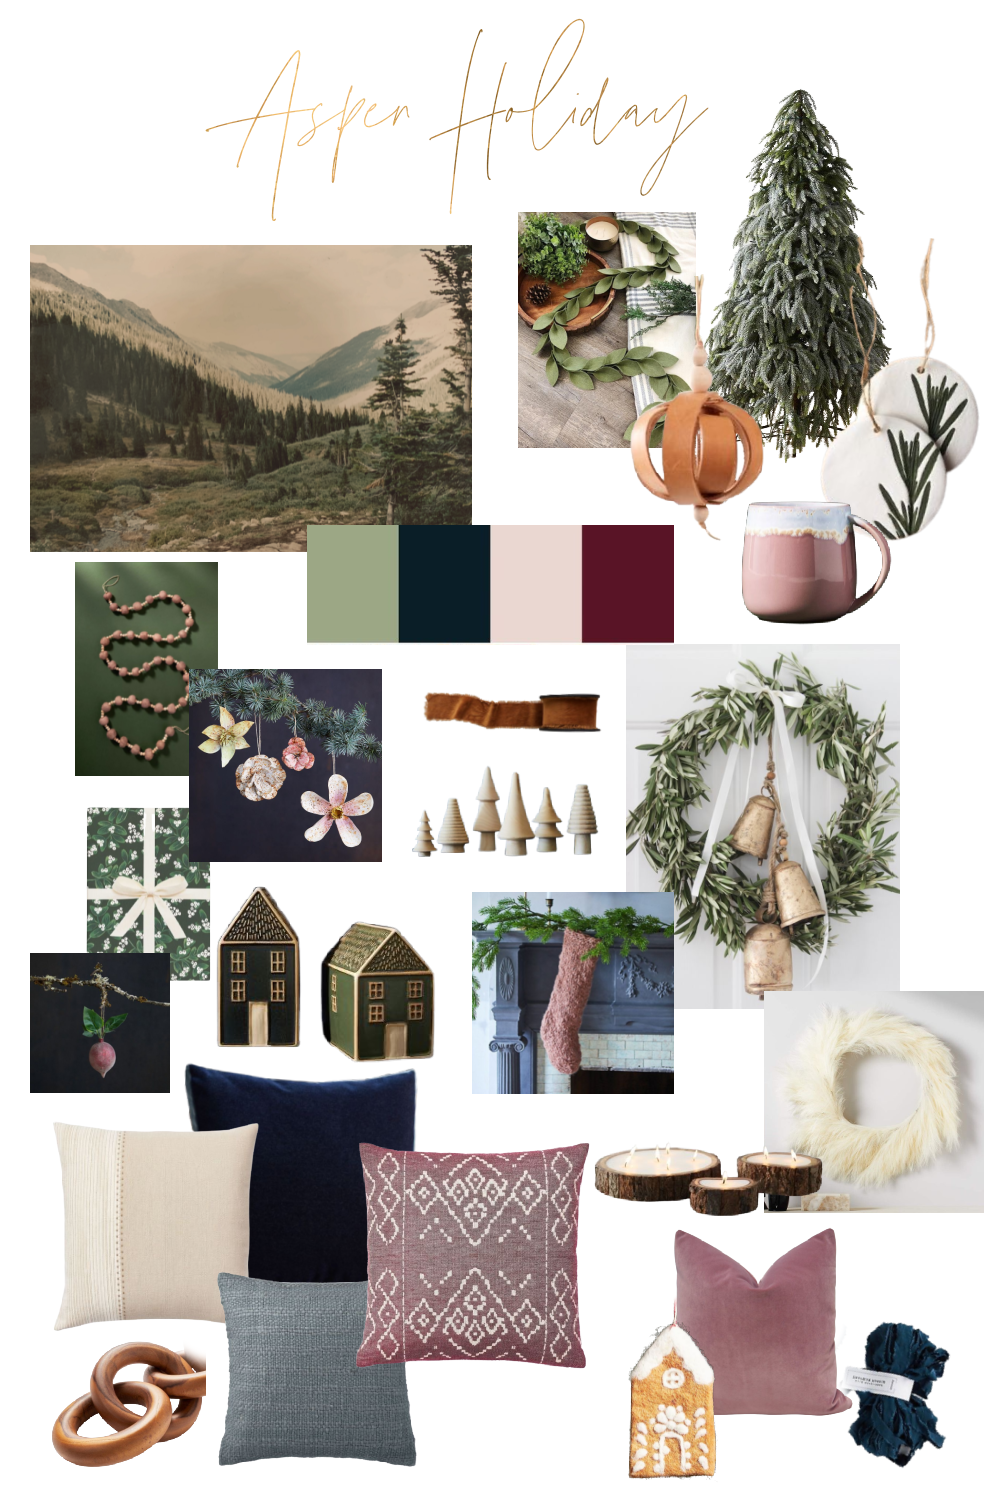 Aspen Holiday-This Year’s Christmas Concept